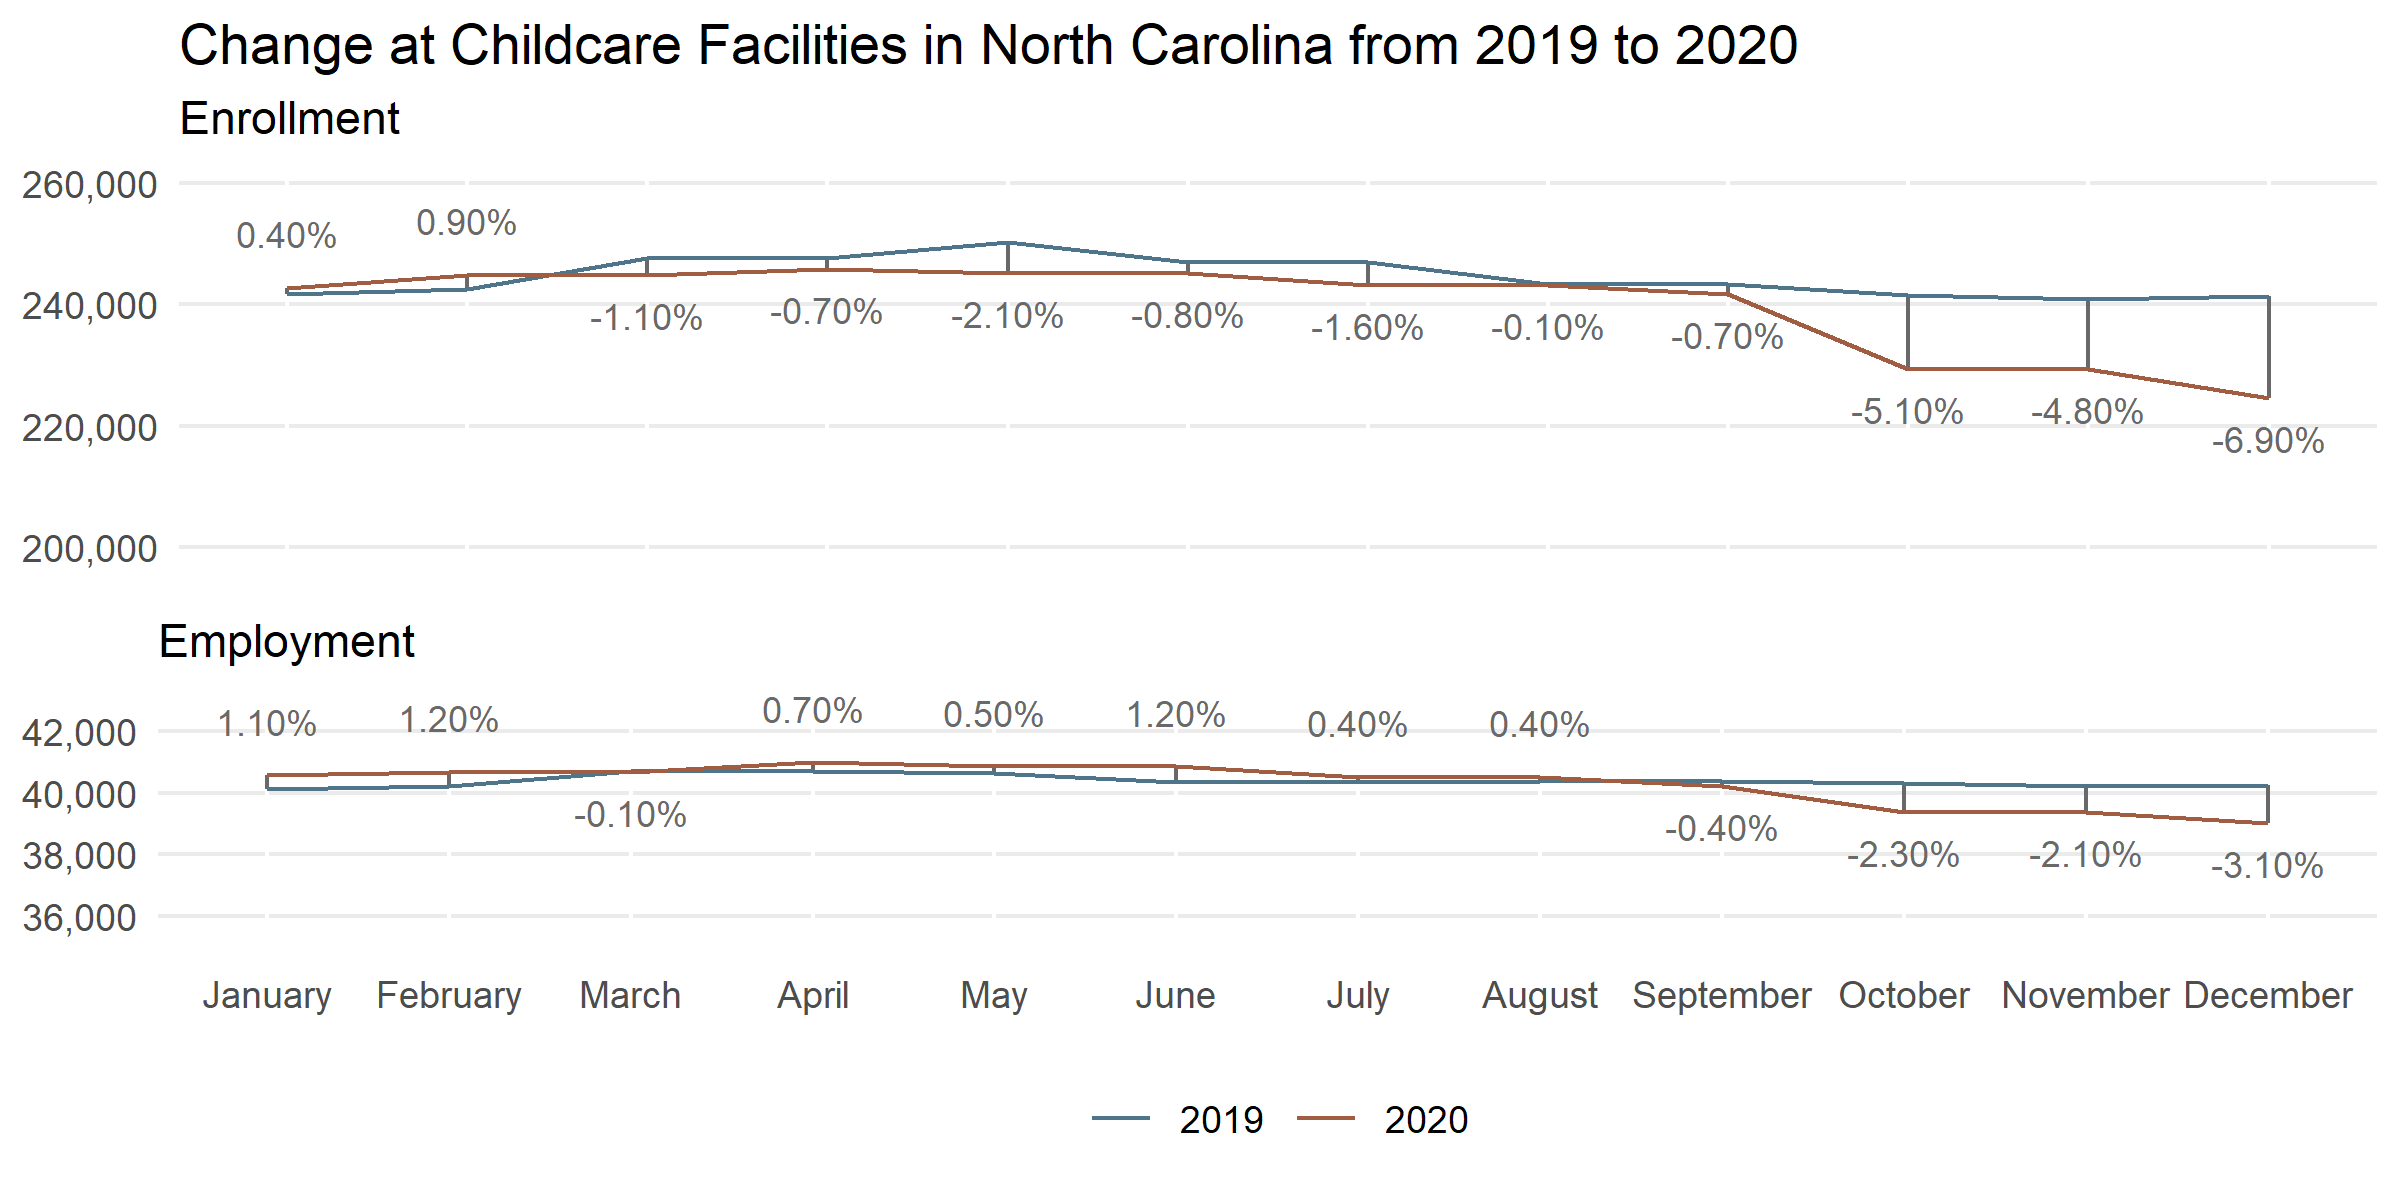 Two line charts compare enrollment and employment at childcare facilities from 2019 (black) to 2020 (teal), with text listing the relative change for each month. Both experienced their sharpest declines in October, with decreases of -5.1% for enrollment and -2.3% for employment.